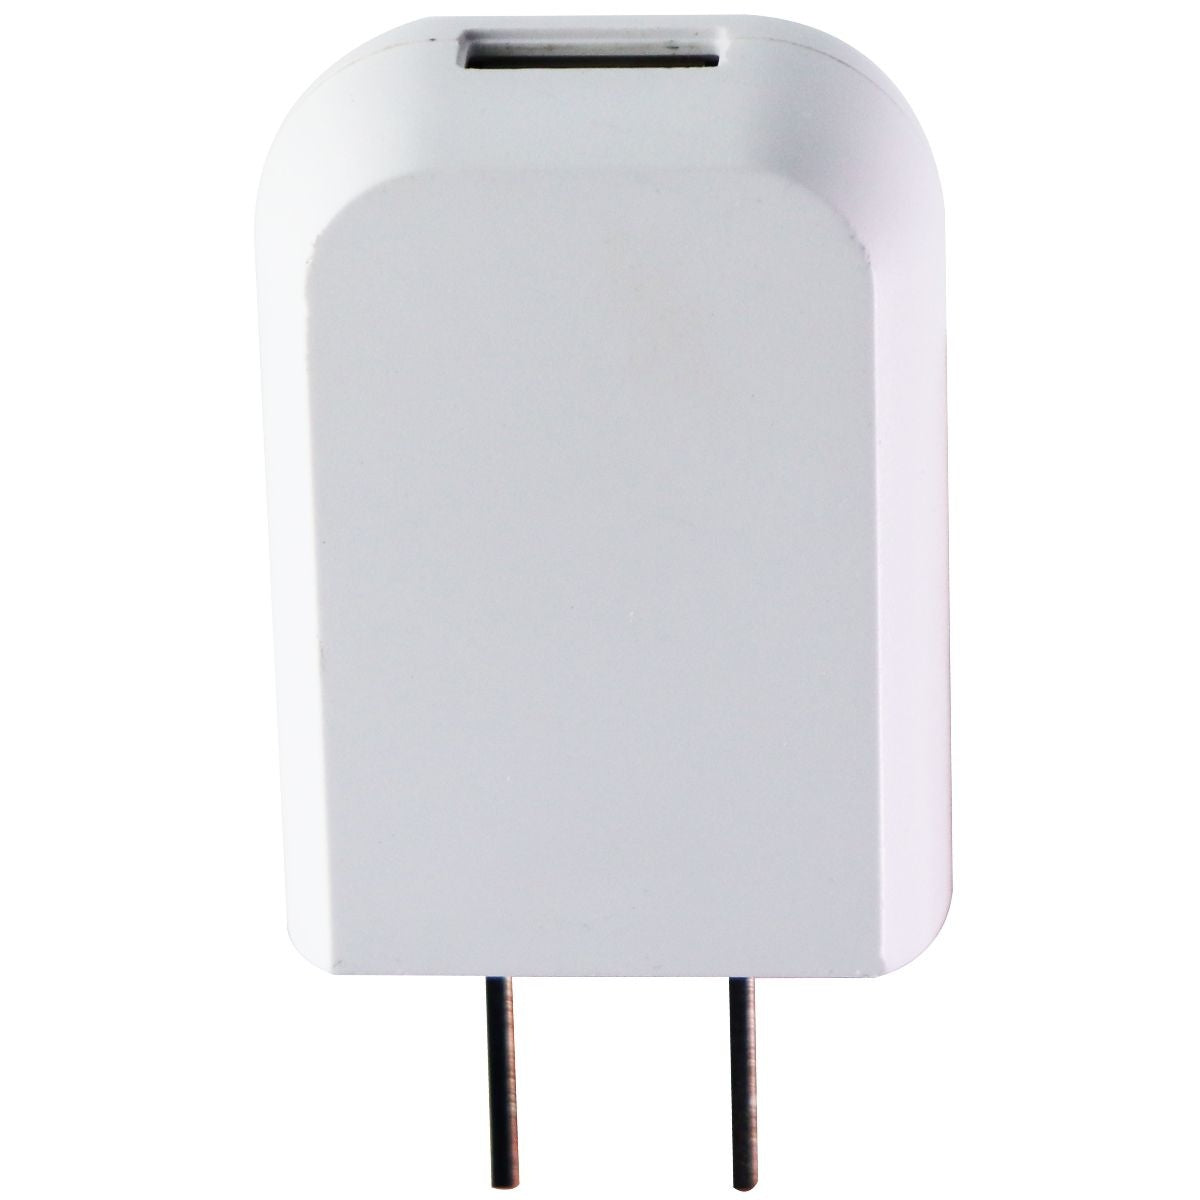 (5V/1A) Switching Power Supply USB Wall Charger/Adapter - White (DCTA050100UI) Cell Phone - Chargers & Cradles Unbranded    - Simple Cell Bulk Wholesale Pricing - USA Seller